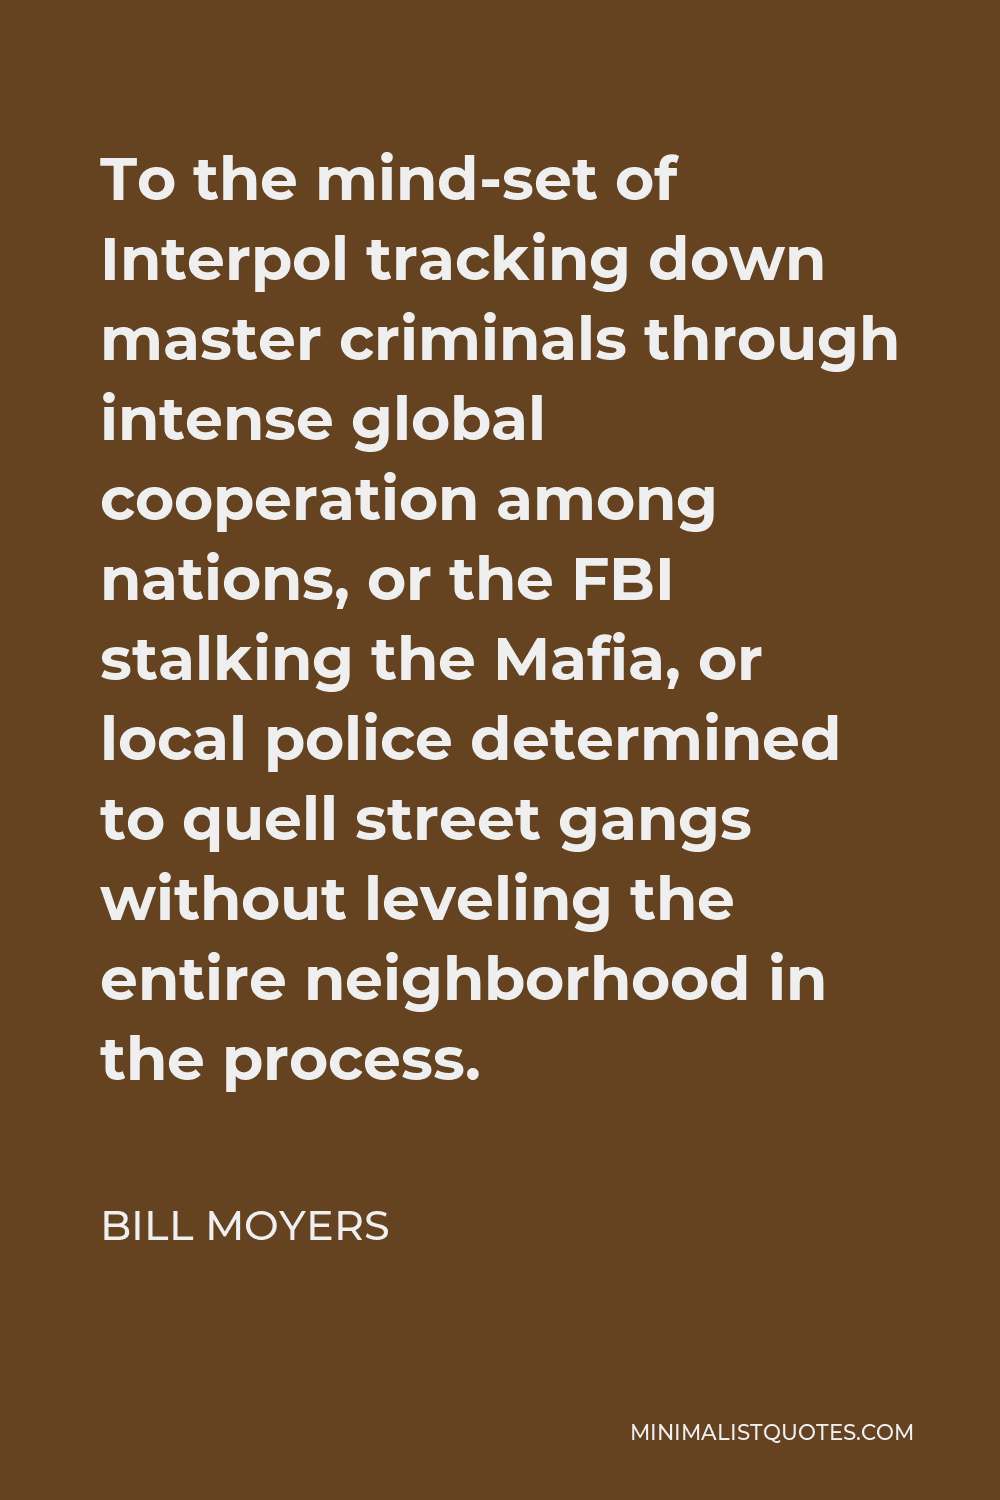 Bill Moyers Quote - To the mind-set of Interpol tracking down master criminals through intense global cooperation among nations, or the FBI stalking the Mafia, or local police determined to quell street gangs without leveling the entire neighborhood in the process.